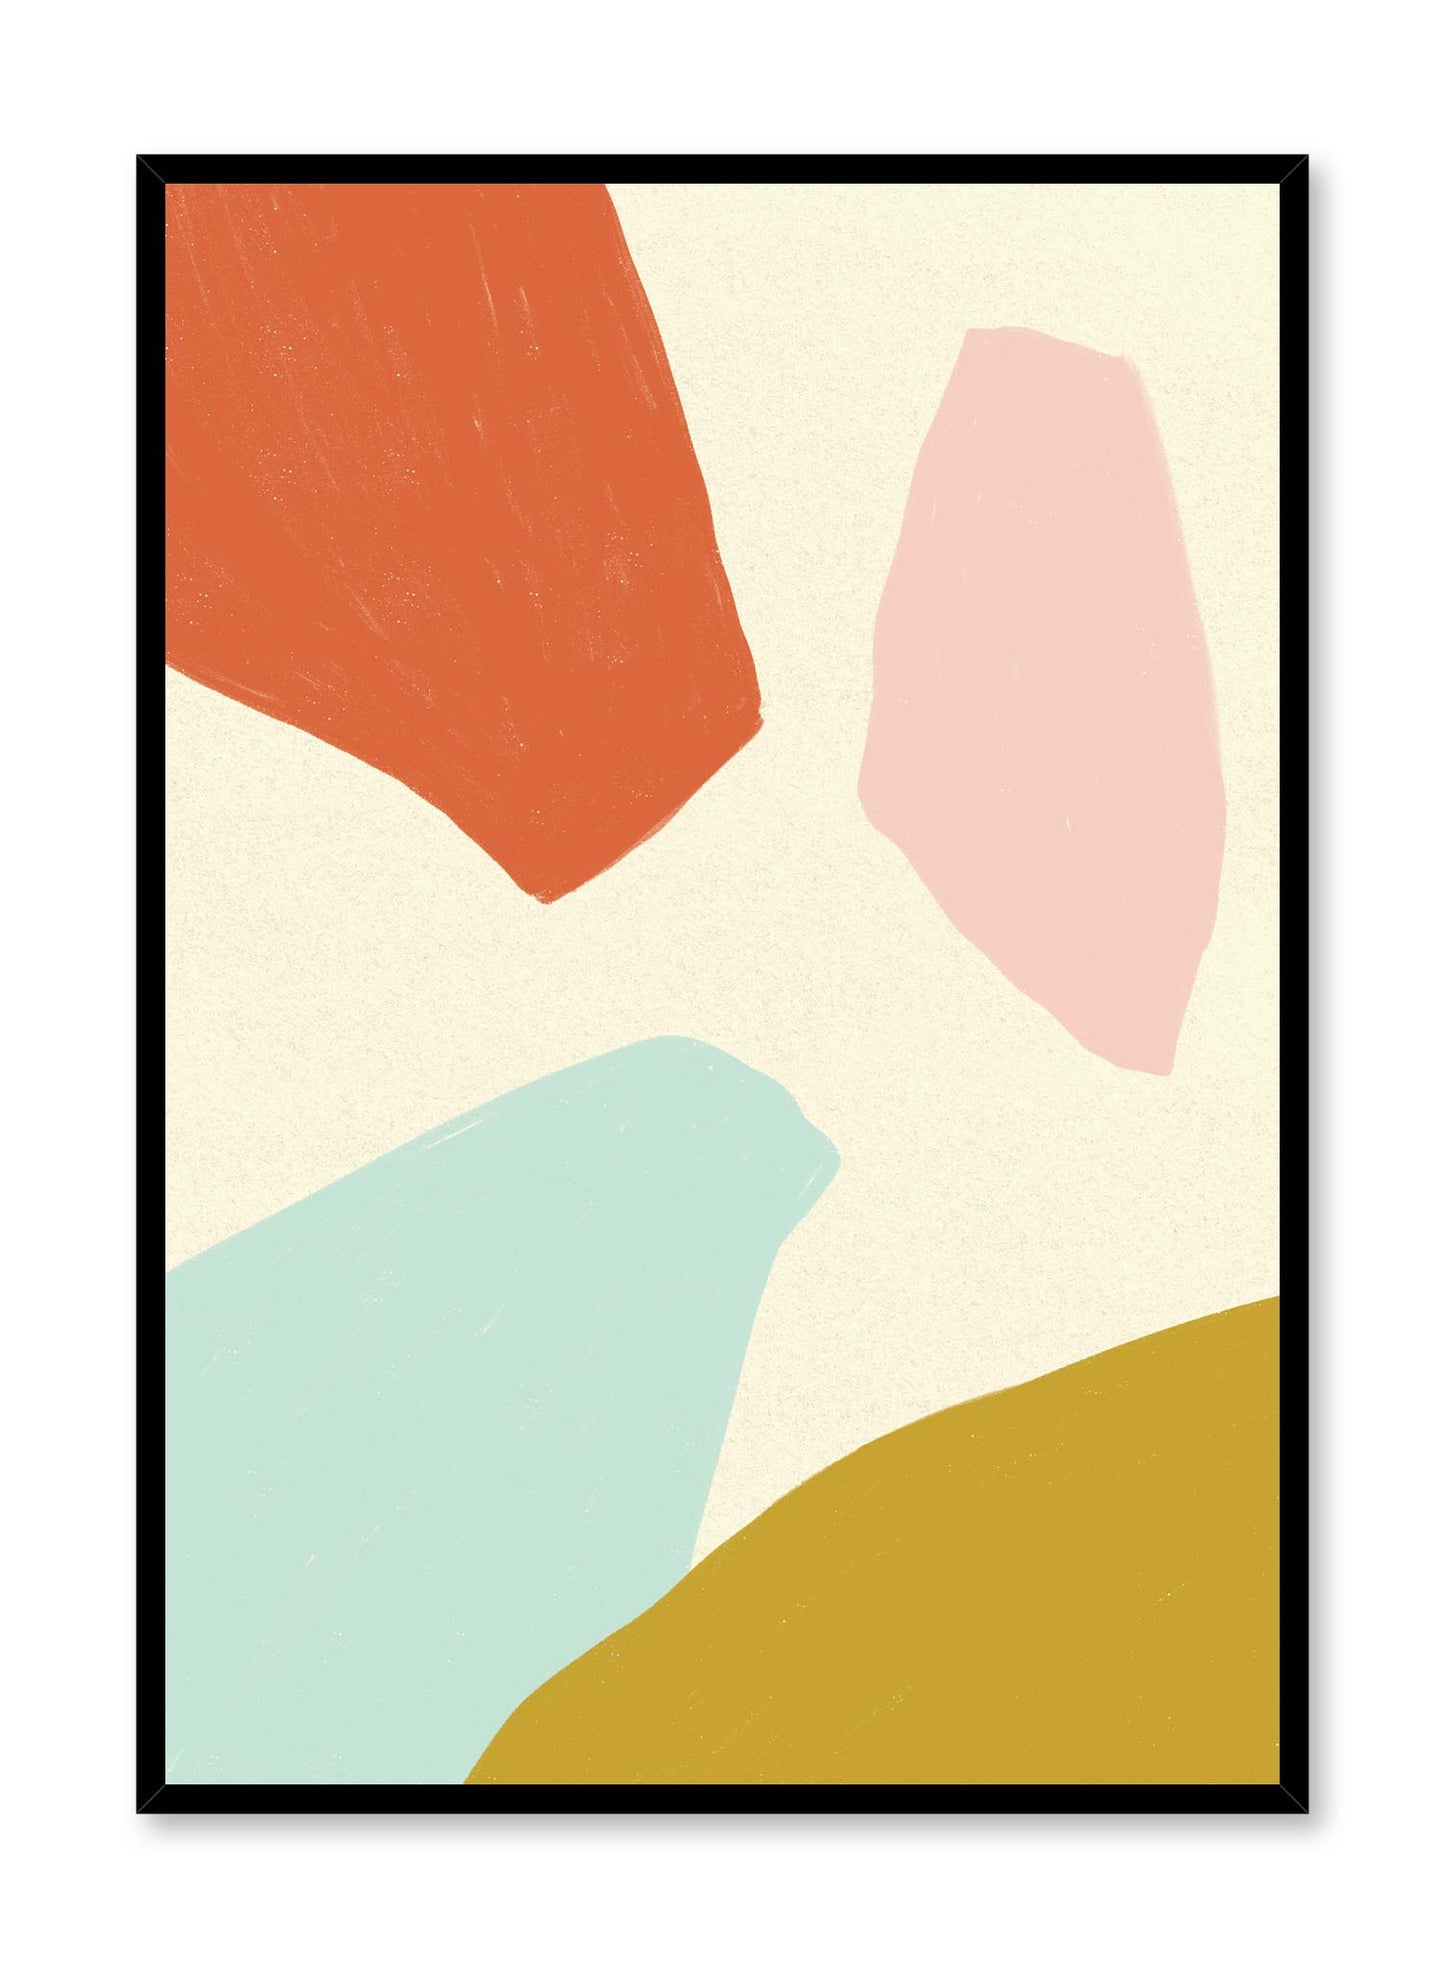 Shapin’ Up is a minimalist illustration poster of colourful abstract shapes by Opposite Wall.